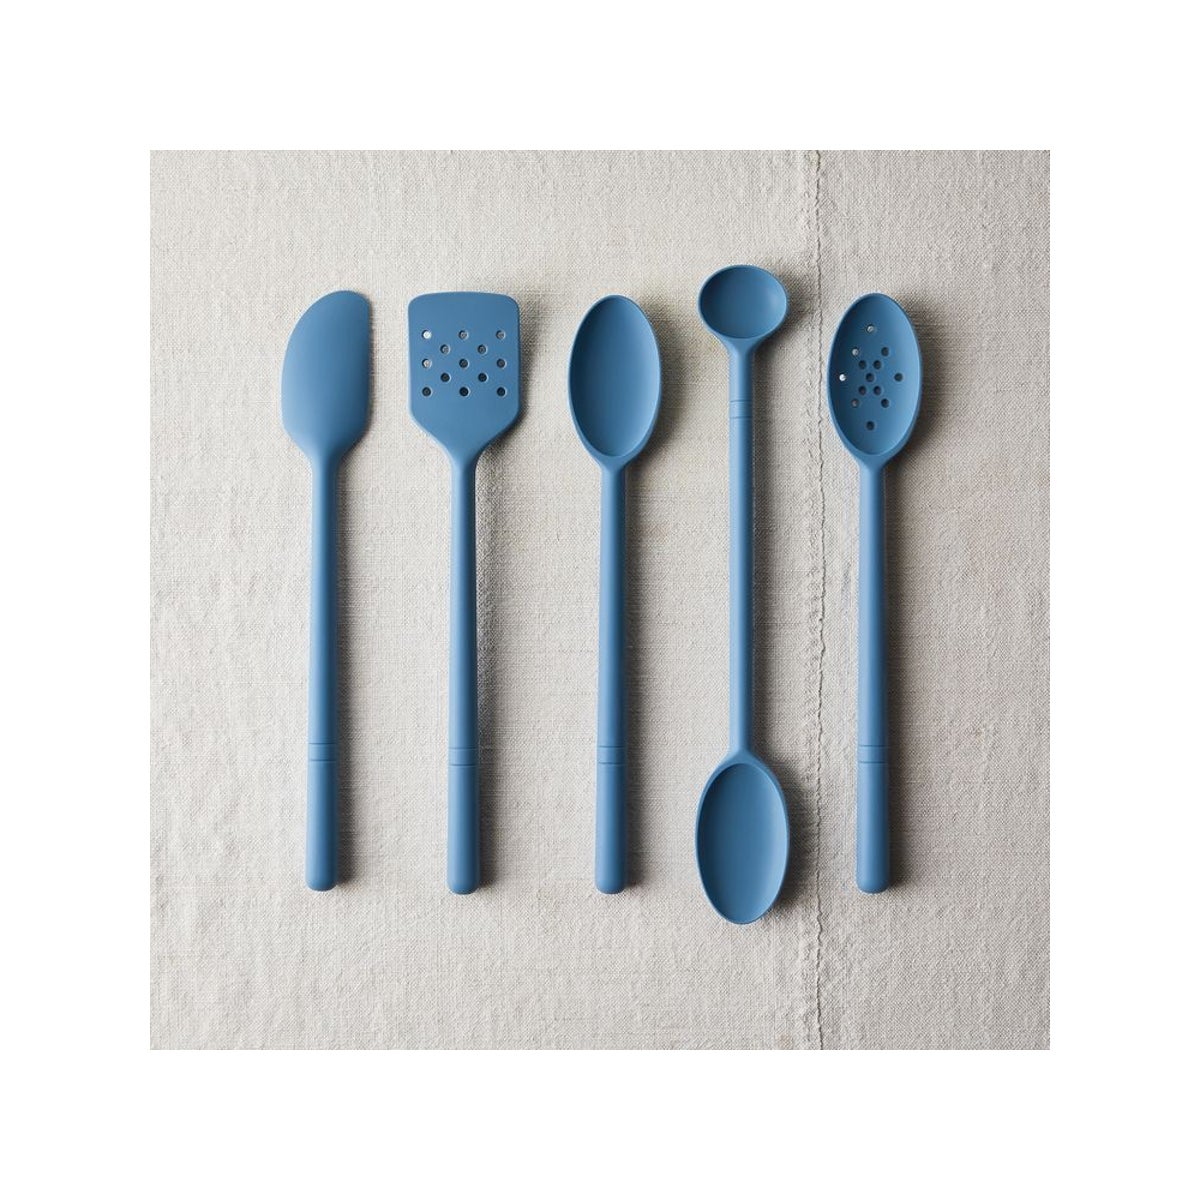 https://www.saveur.com/uploads/2021/10/07/Best-Silicone-Cooking-Utensils-Option_-Five-Two-Silicone-Spoons.jpg?auto=webp